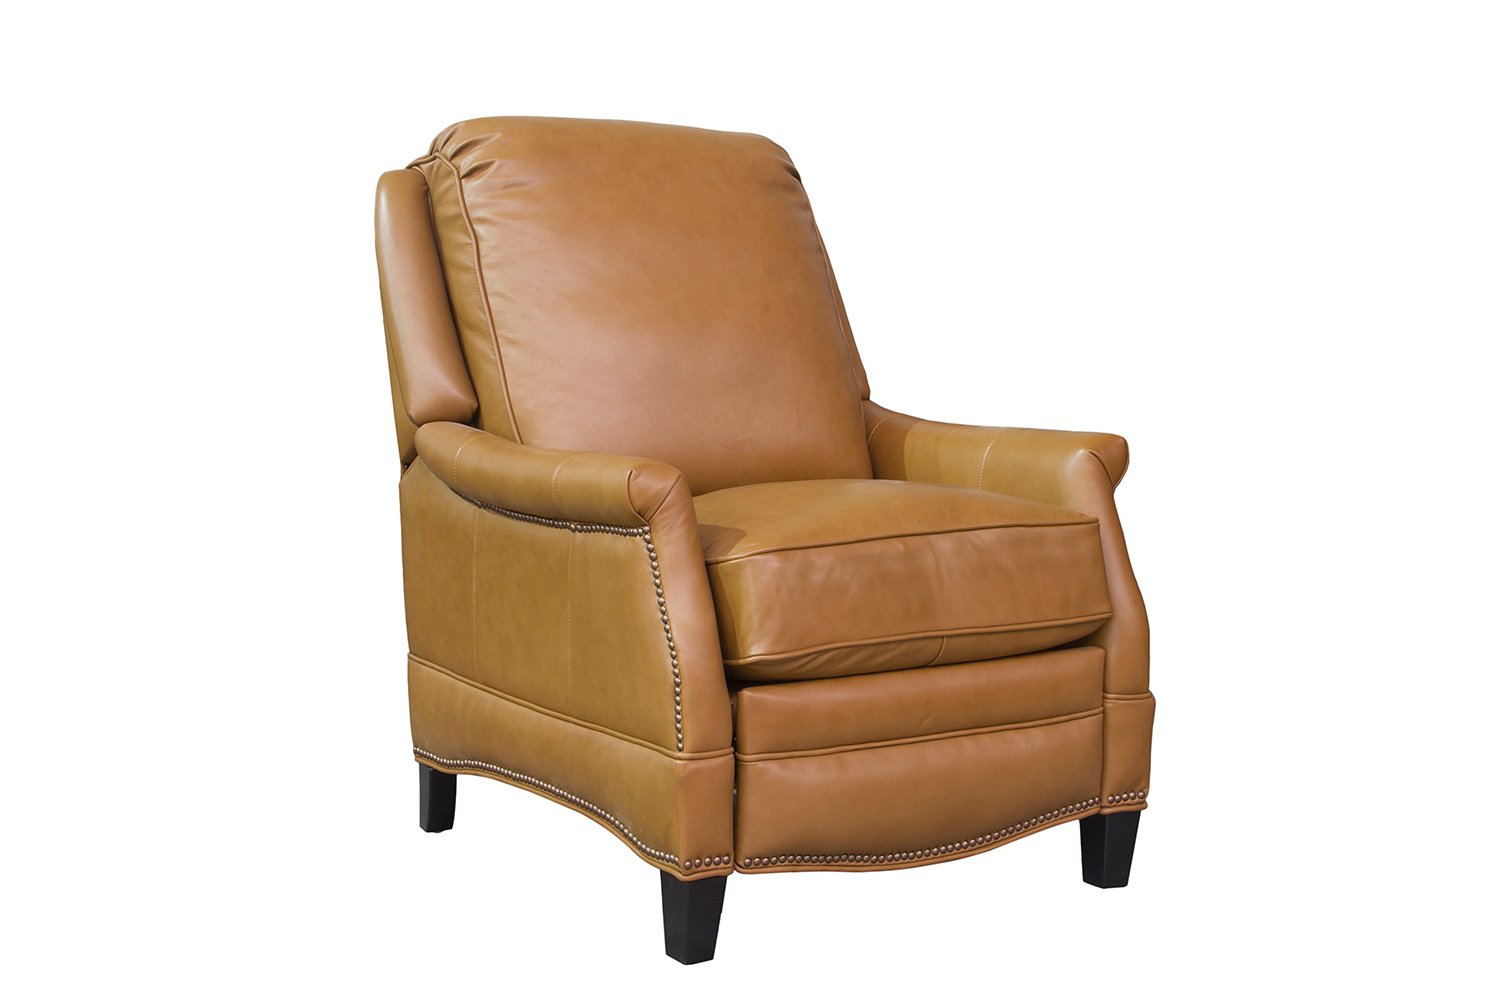 Barcalounger Ashebrooke Recliner Chair - Shoreham Ponytail/All Leather